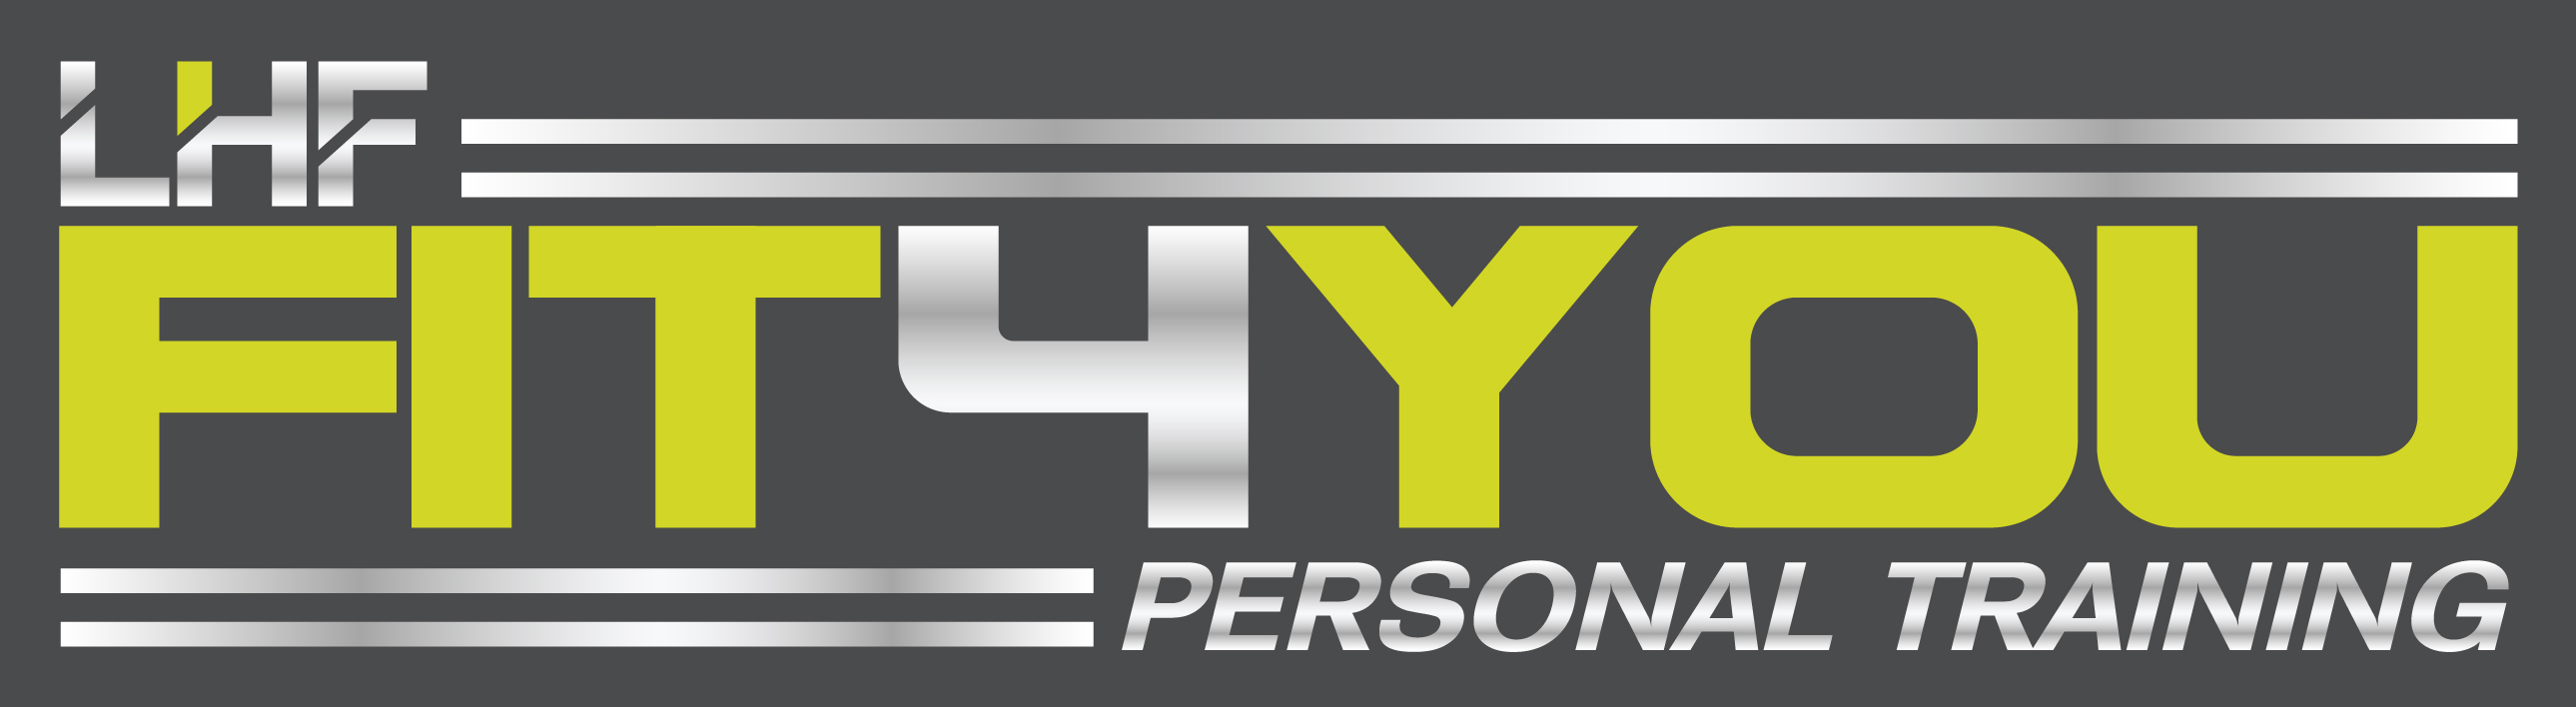 FIT4YOU personal training logo